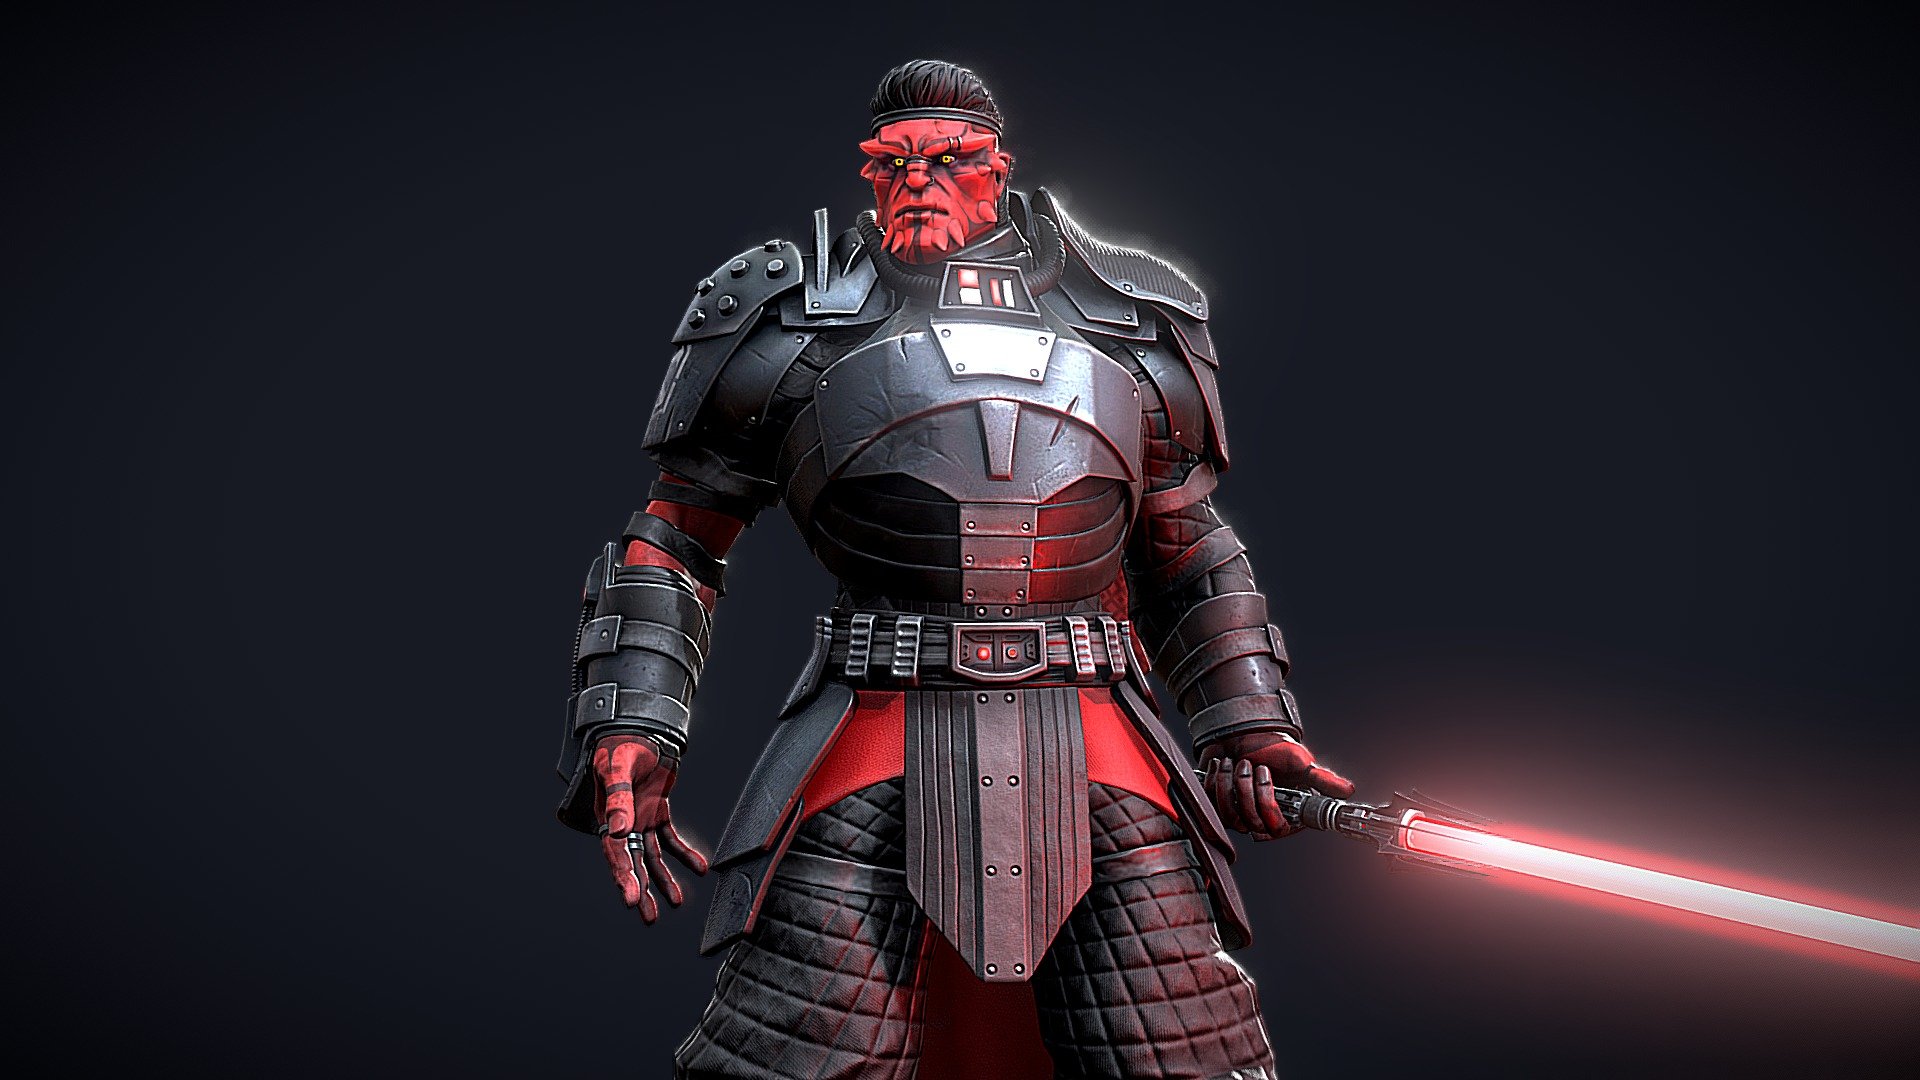 Little side project : 70k tris (Lightsaber included).

Link to Artstation Renders : https://www.artstation.com/artwork/m80WO1

Lord Volaris, a Sith Pureblood enforcer, emerged from the shadows as a relentless instrument of the dark side. Raised in the Sith Empire's heartland, Dromuund kaas, he displayed exceptional prowess in the Force and an intense contempt for the jedi code. Power was all that mattered to him, and only the strong would survive.

Handpicked by the Sith Council for his unwavering devotion, Volaris was entrusted with the task of eliminating rogue Sith and isolated Jedi threats. His ferocity burned like a flame within him, propelling him to become an unstoppable force against those who dared to challenge the Empire's supremacy.

Volaris relentless pursuit of his ennemies became famous, his name whispered in fear among both Sith and Jedi alike. He embraced his role with unwavering determination, seeing himself as a guardian of Sith purity and a protector of the Empire's dominance 3d model